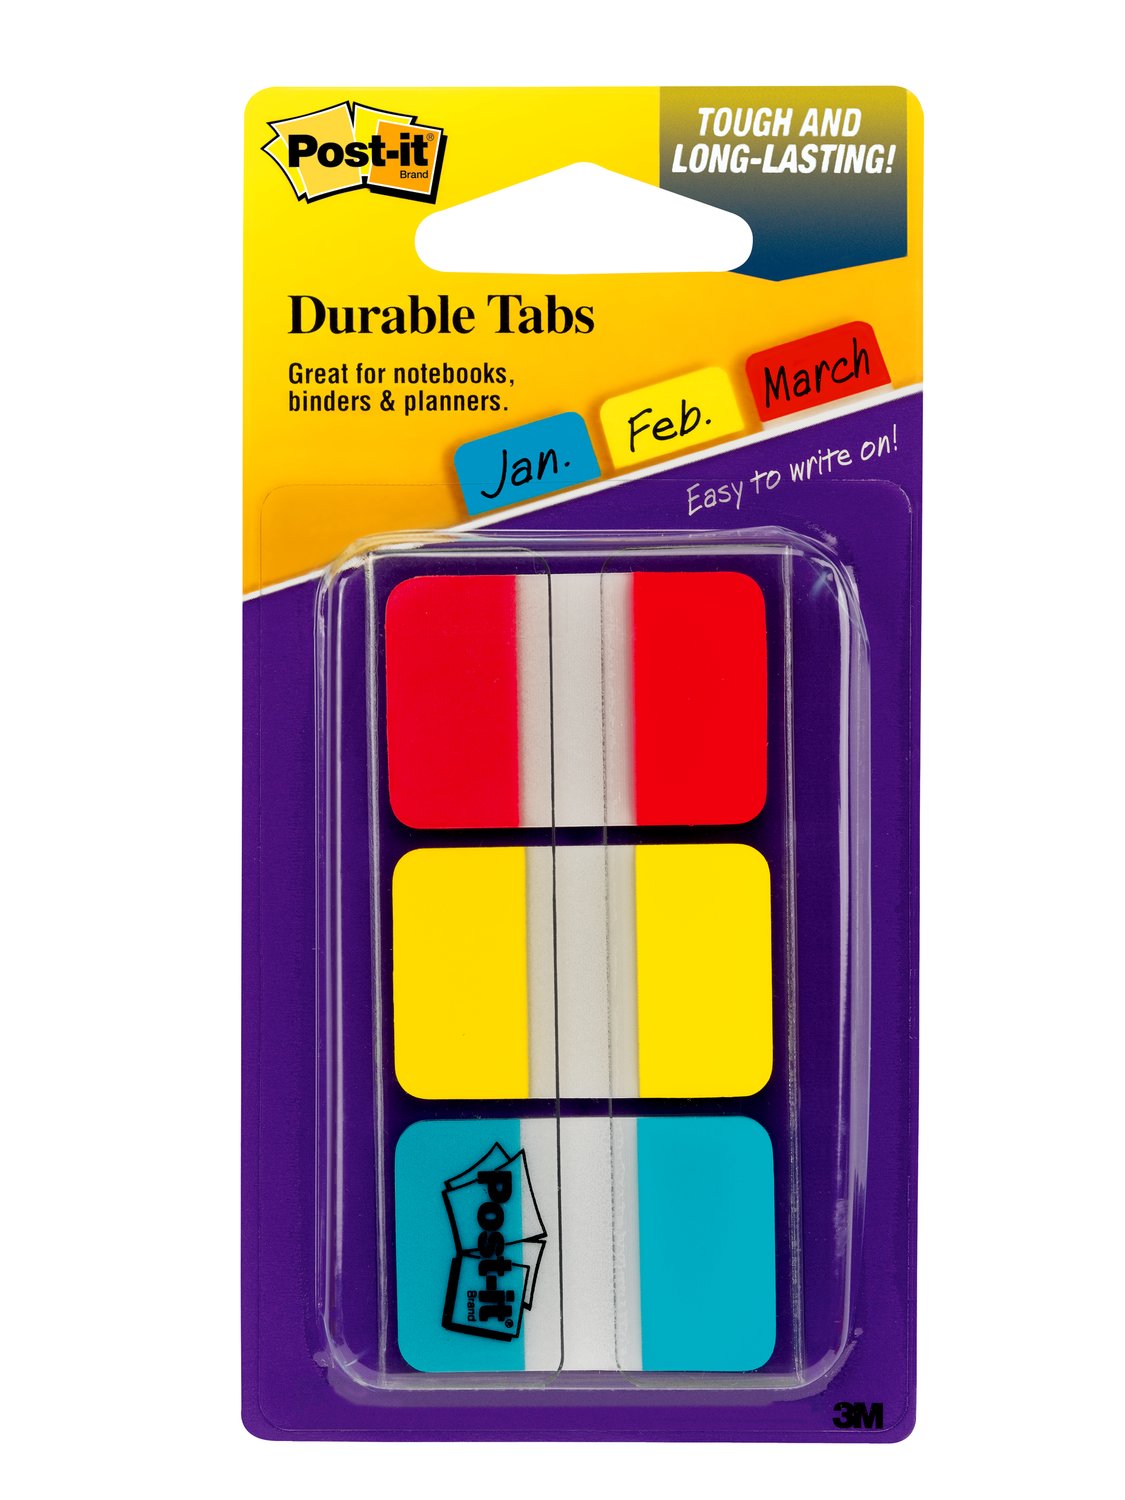 7000052679 - Post-it Durable Tabs 686-RYB, 1 in. x 1.5 in. Red, Canary Yellow, Blue